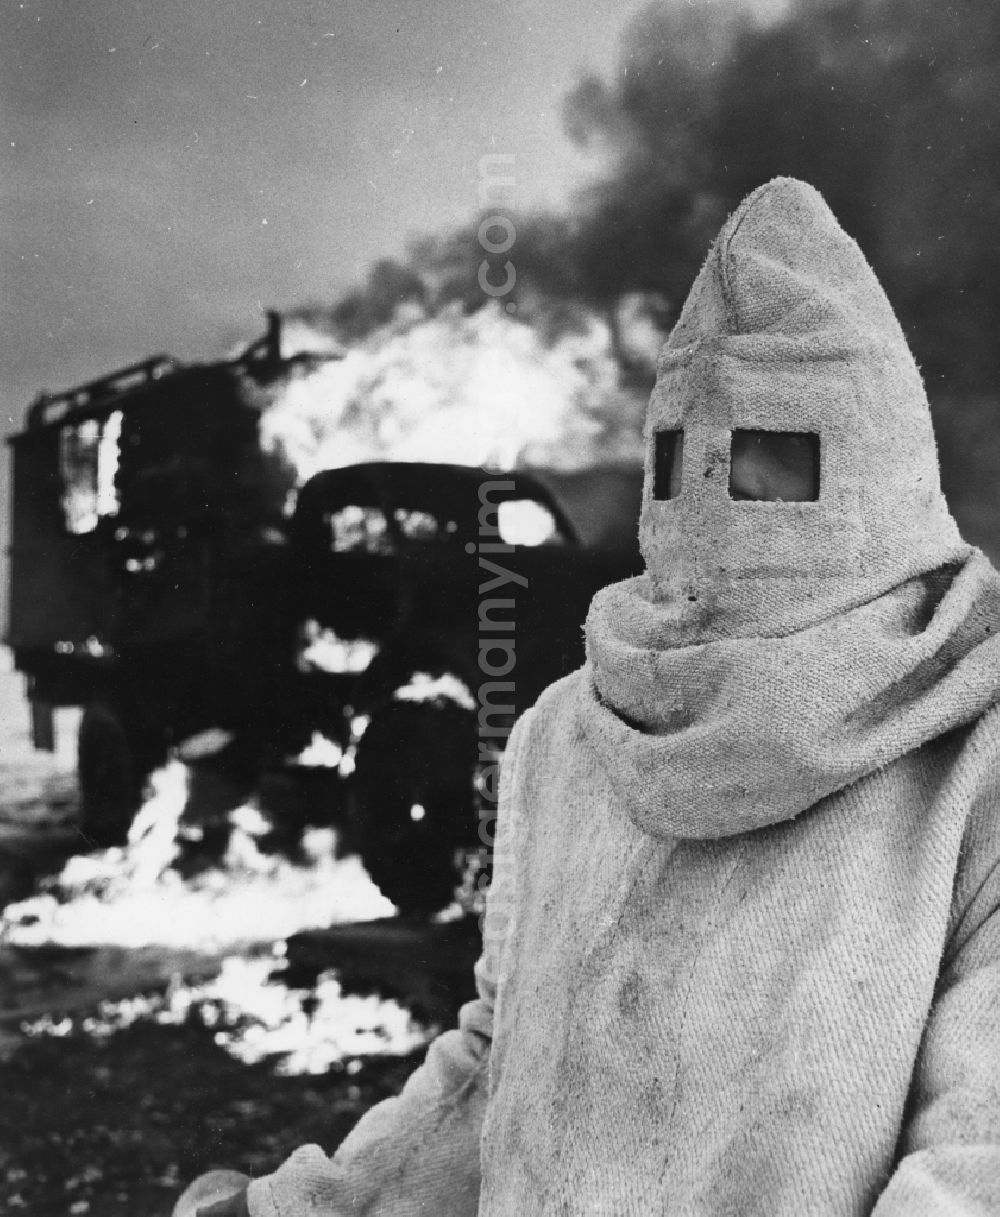 Peenemünde: Maneuver exercise of NVA troops of the chemical defense (NBC) in Peenemuende in Mecklenburg-Vorpommern. In the foreground a soldier in a asbestos and fire resistant protective clothing. In the background burning objects